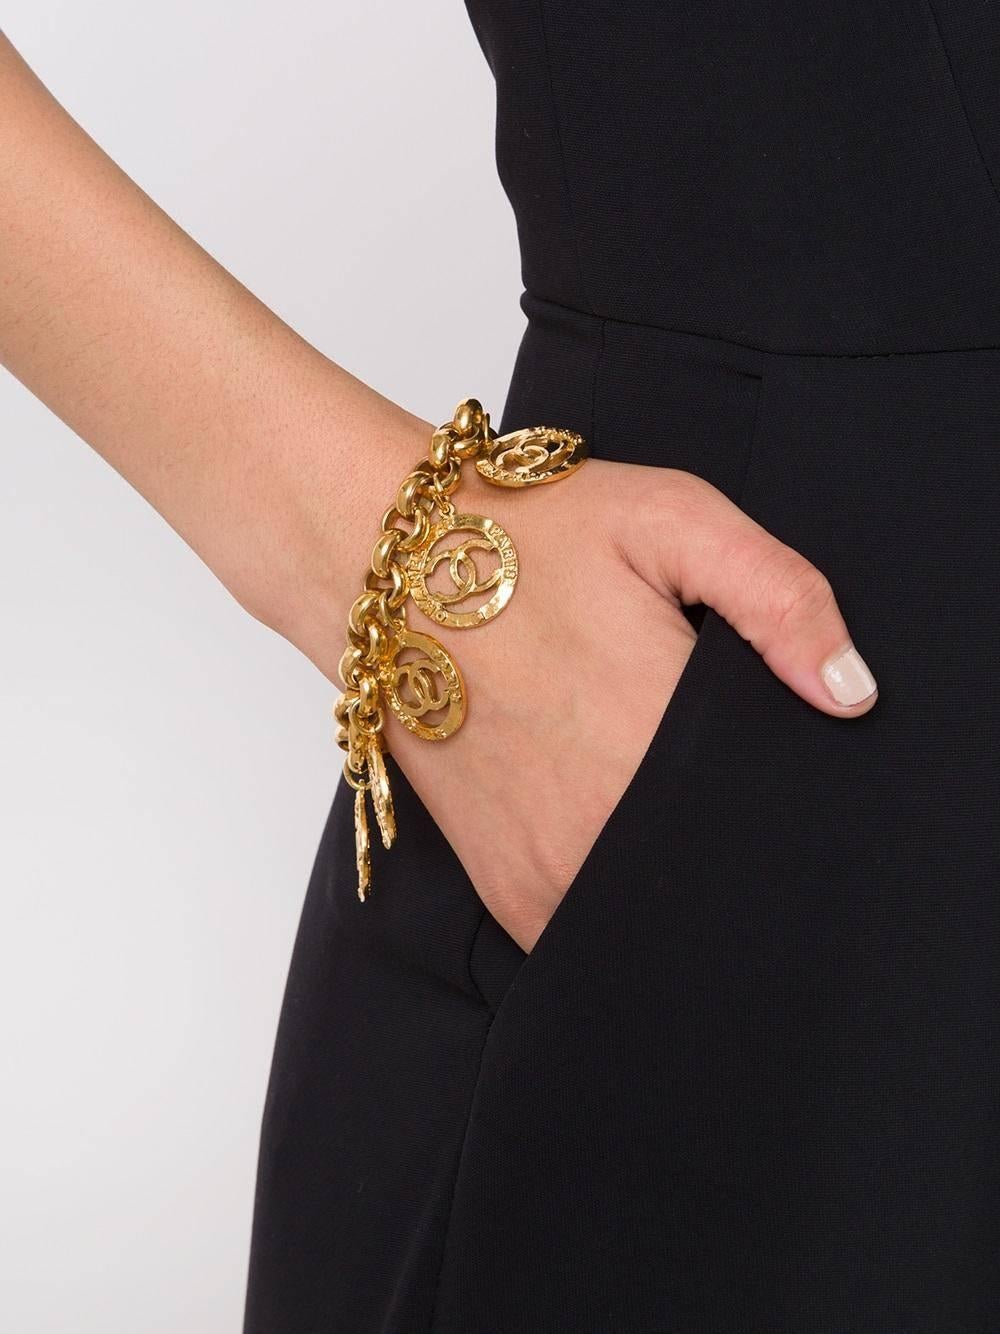 CURATOR'S NOTES

Chanel Gold Metal CC Logo Medallion Chain Link Charm Bangle Bracelet

Metal
Gold tone
Lobster claw closure
Made in France
Total length  7.7"
Charms 0.9" W x 0.9" H